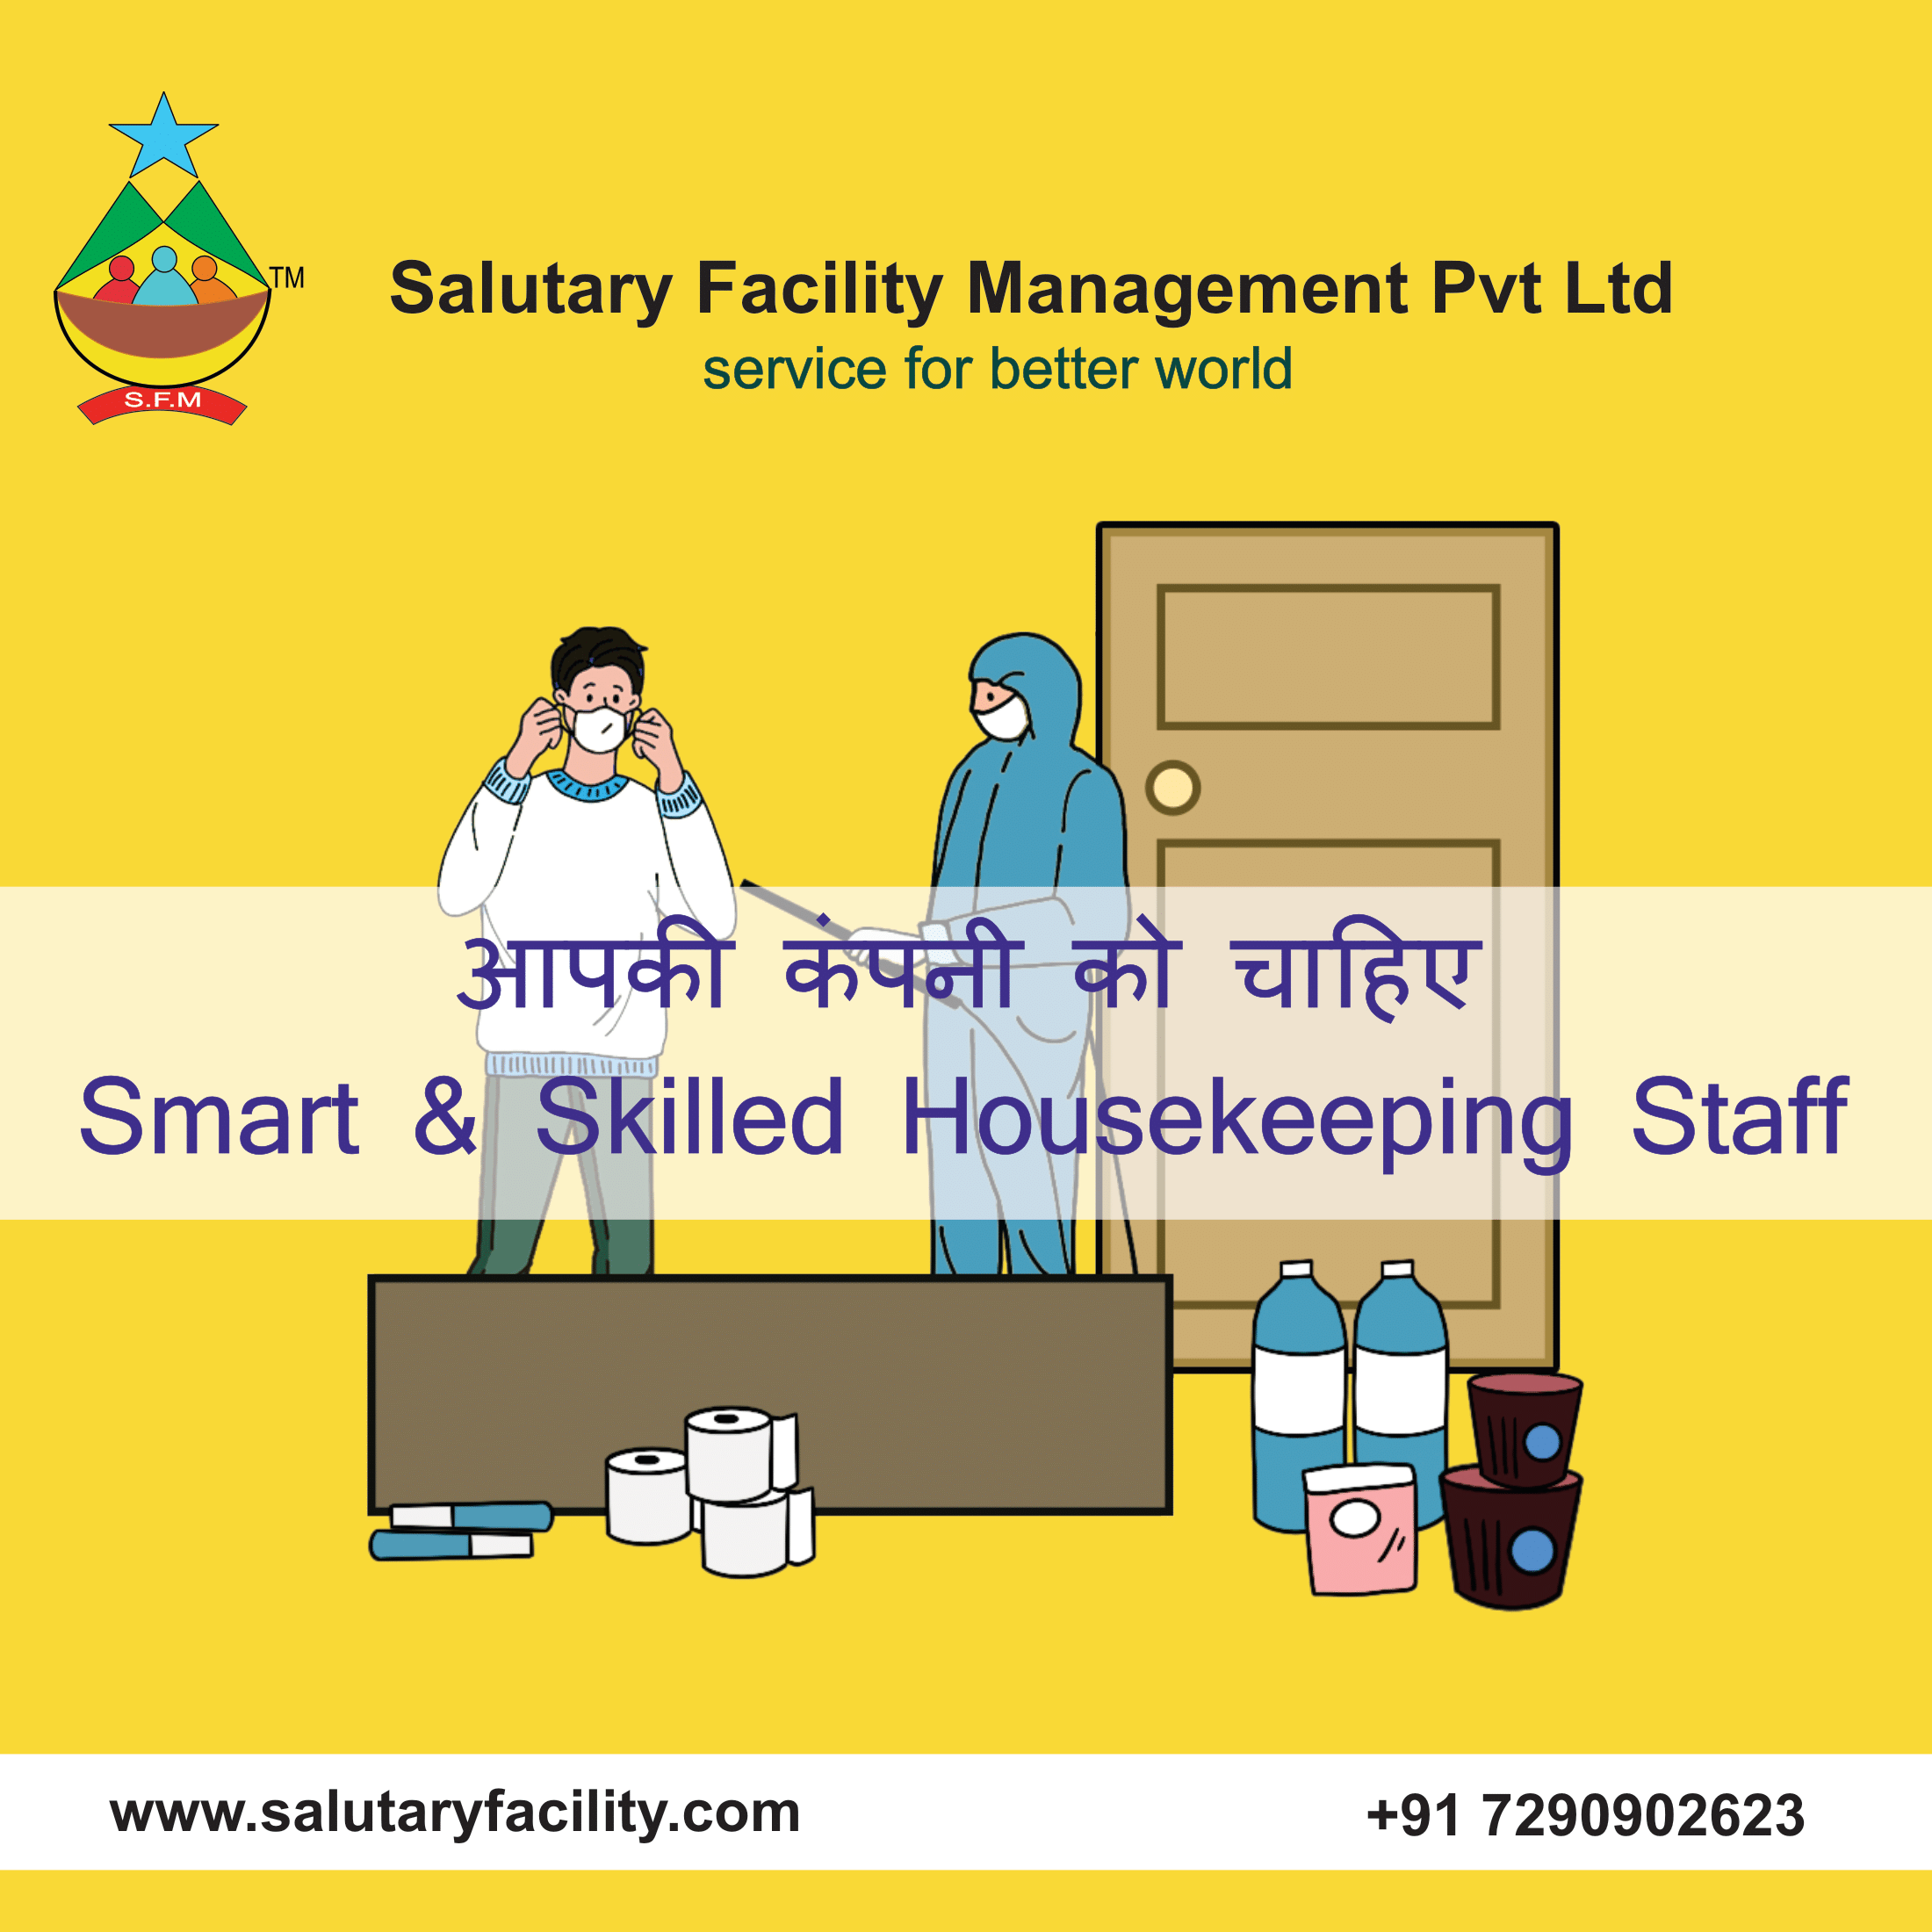 salutary facility management pvt ltd